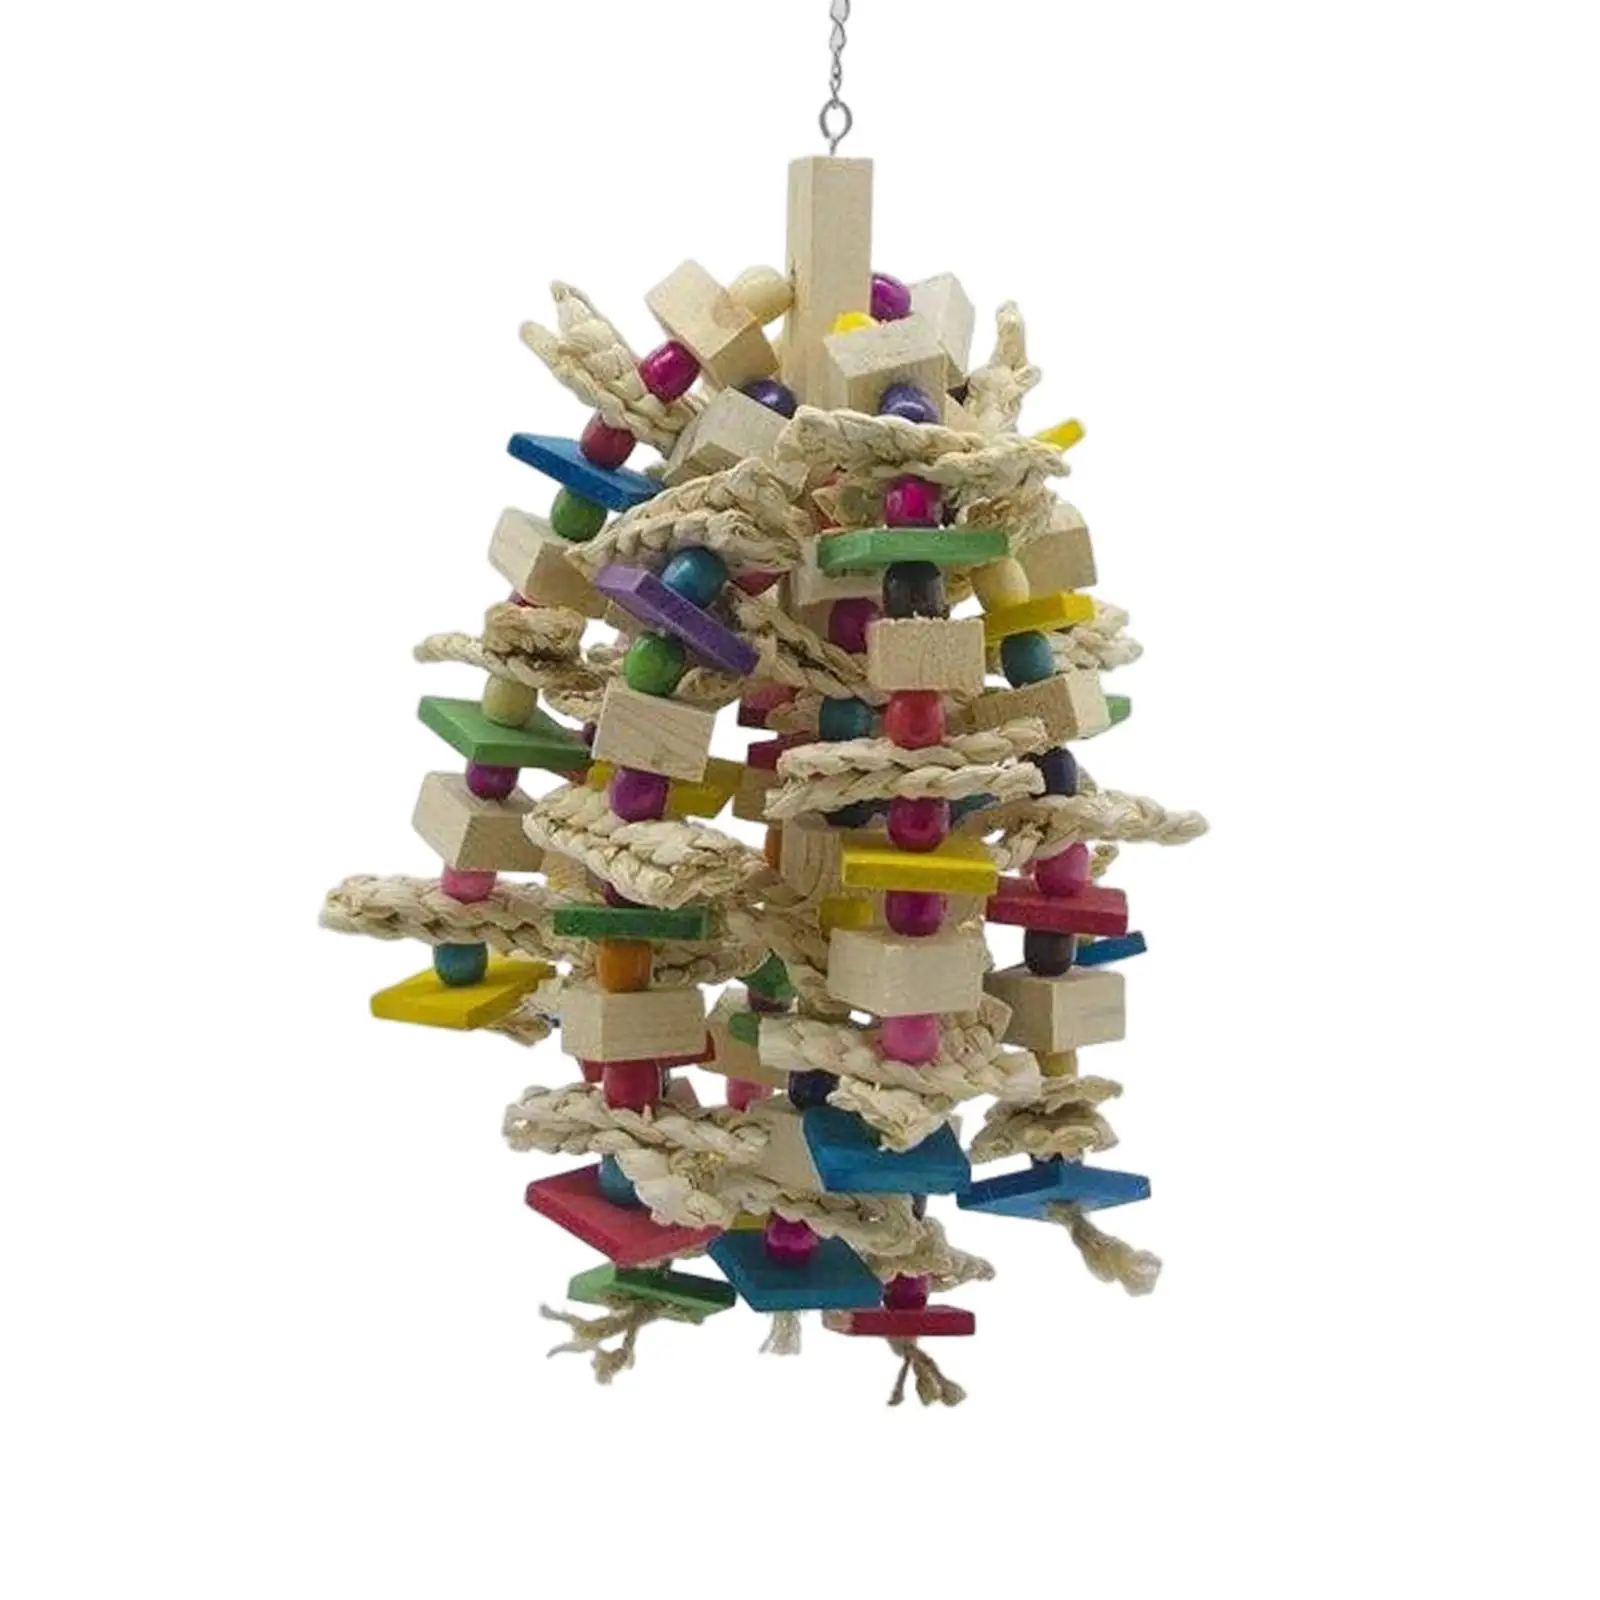 Bird Chewing Toy Multicolored Wooden Blocks Large Parrot Toy for Finches